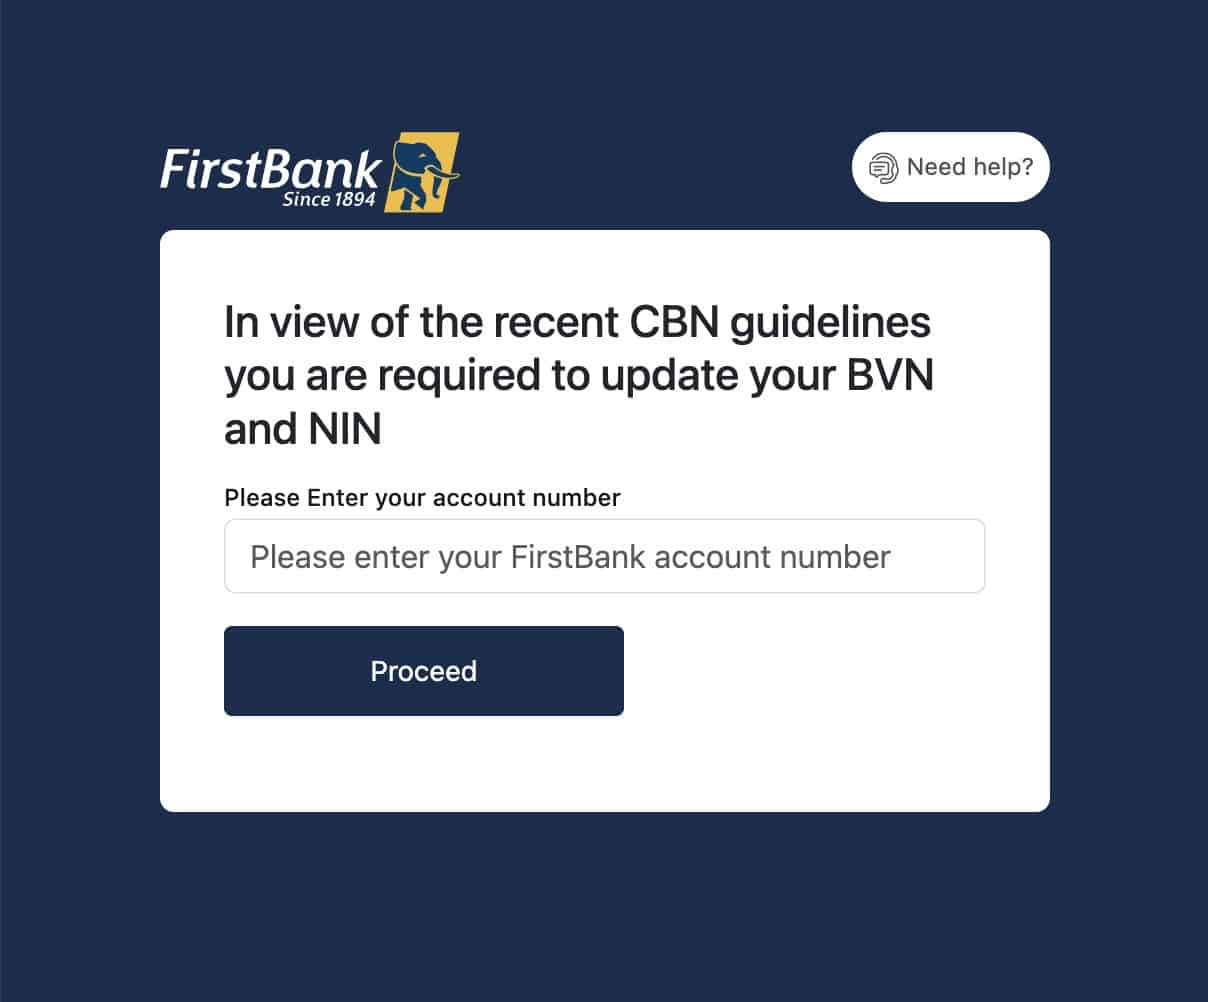 How to Link Your BVN and NIN to Your First Bank Account